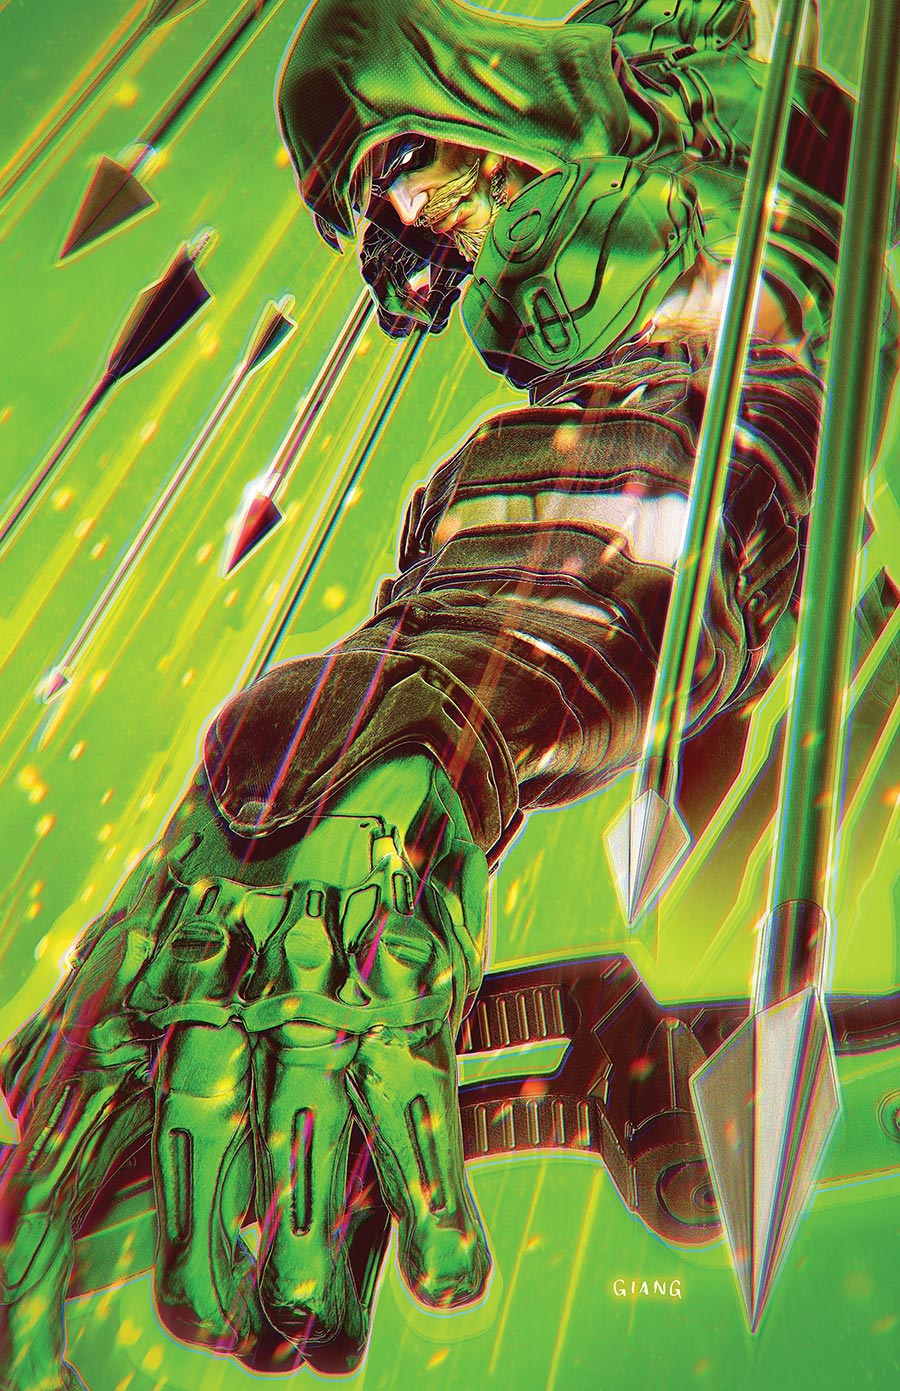 Green Arrow Vol 8 #14 Cover B Variant John Giang Card Stock Cover (Absolute Power Tie-In)